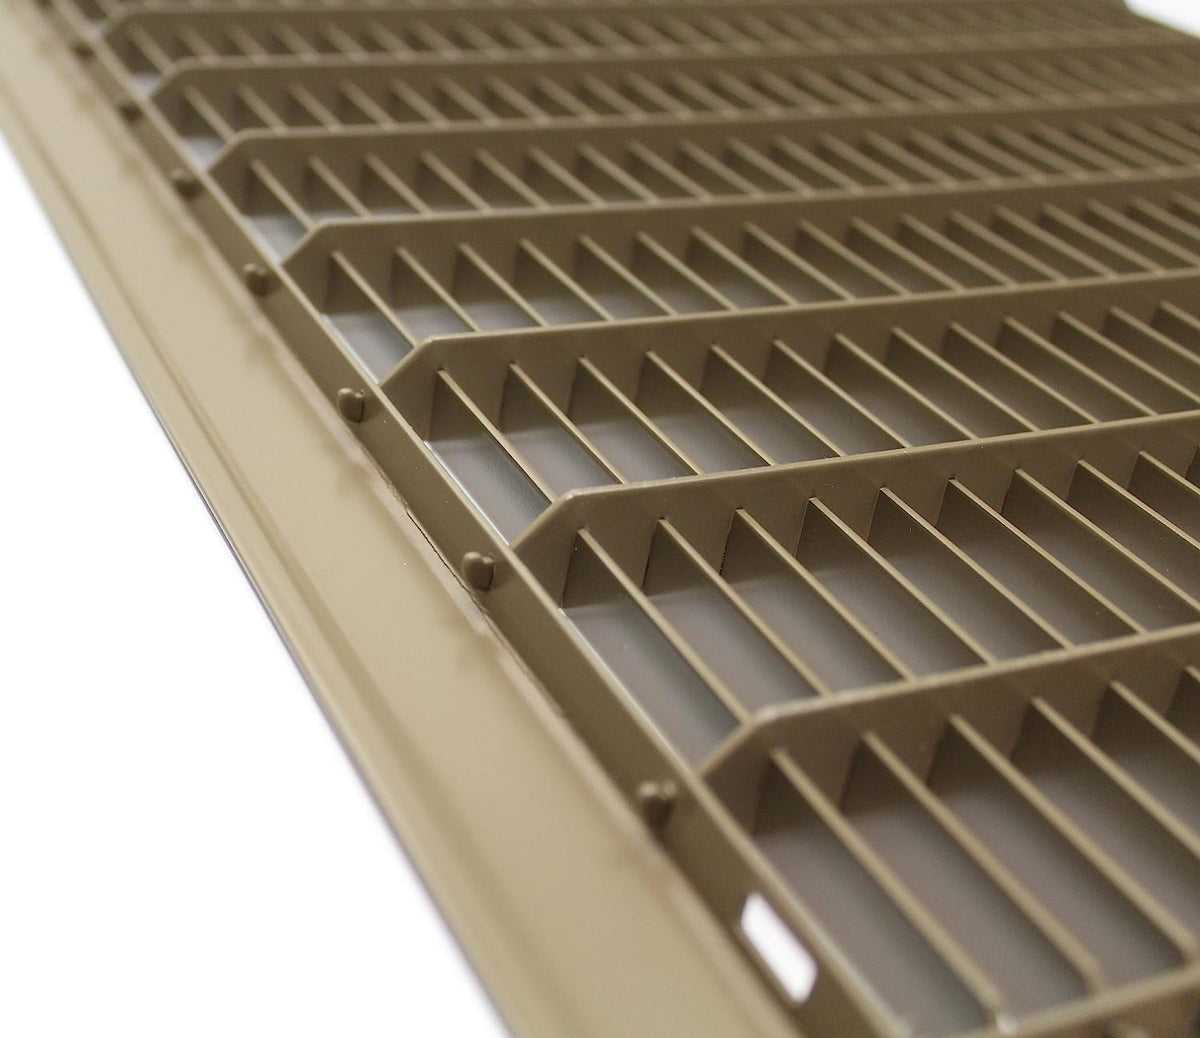 12&quot; X 18&quot; Or 18&quot; X 12&quot; Heavy Duty Floor Grille - Fixed Blades Air Grille - Brown [Outer Dimensions: 13.75 X 19.75]